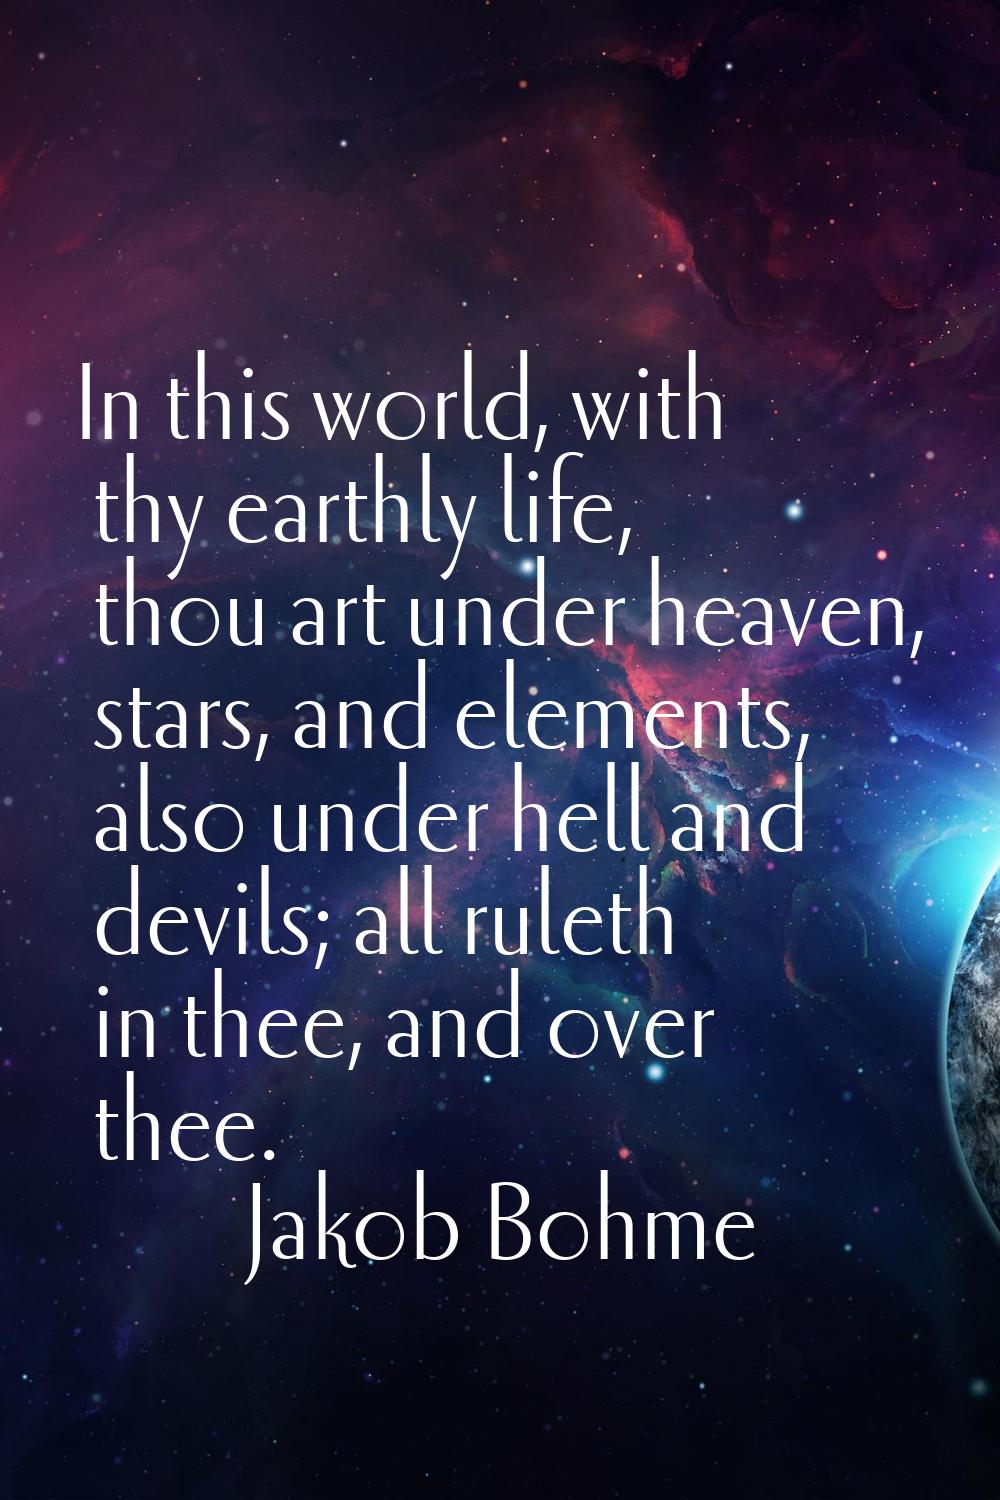 In this world, with thy earthly life, thou art under heaven, stars, and elements, also under hell a